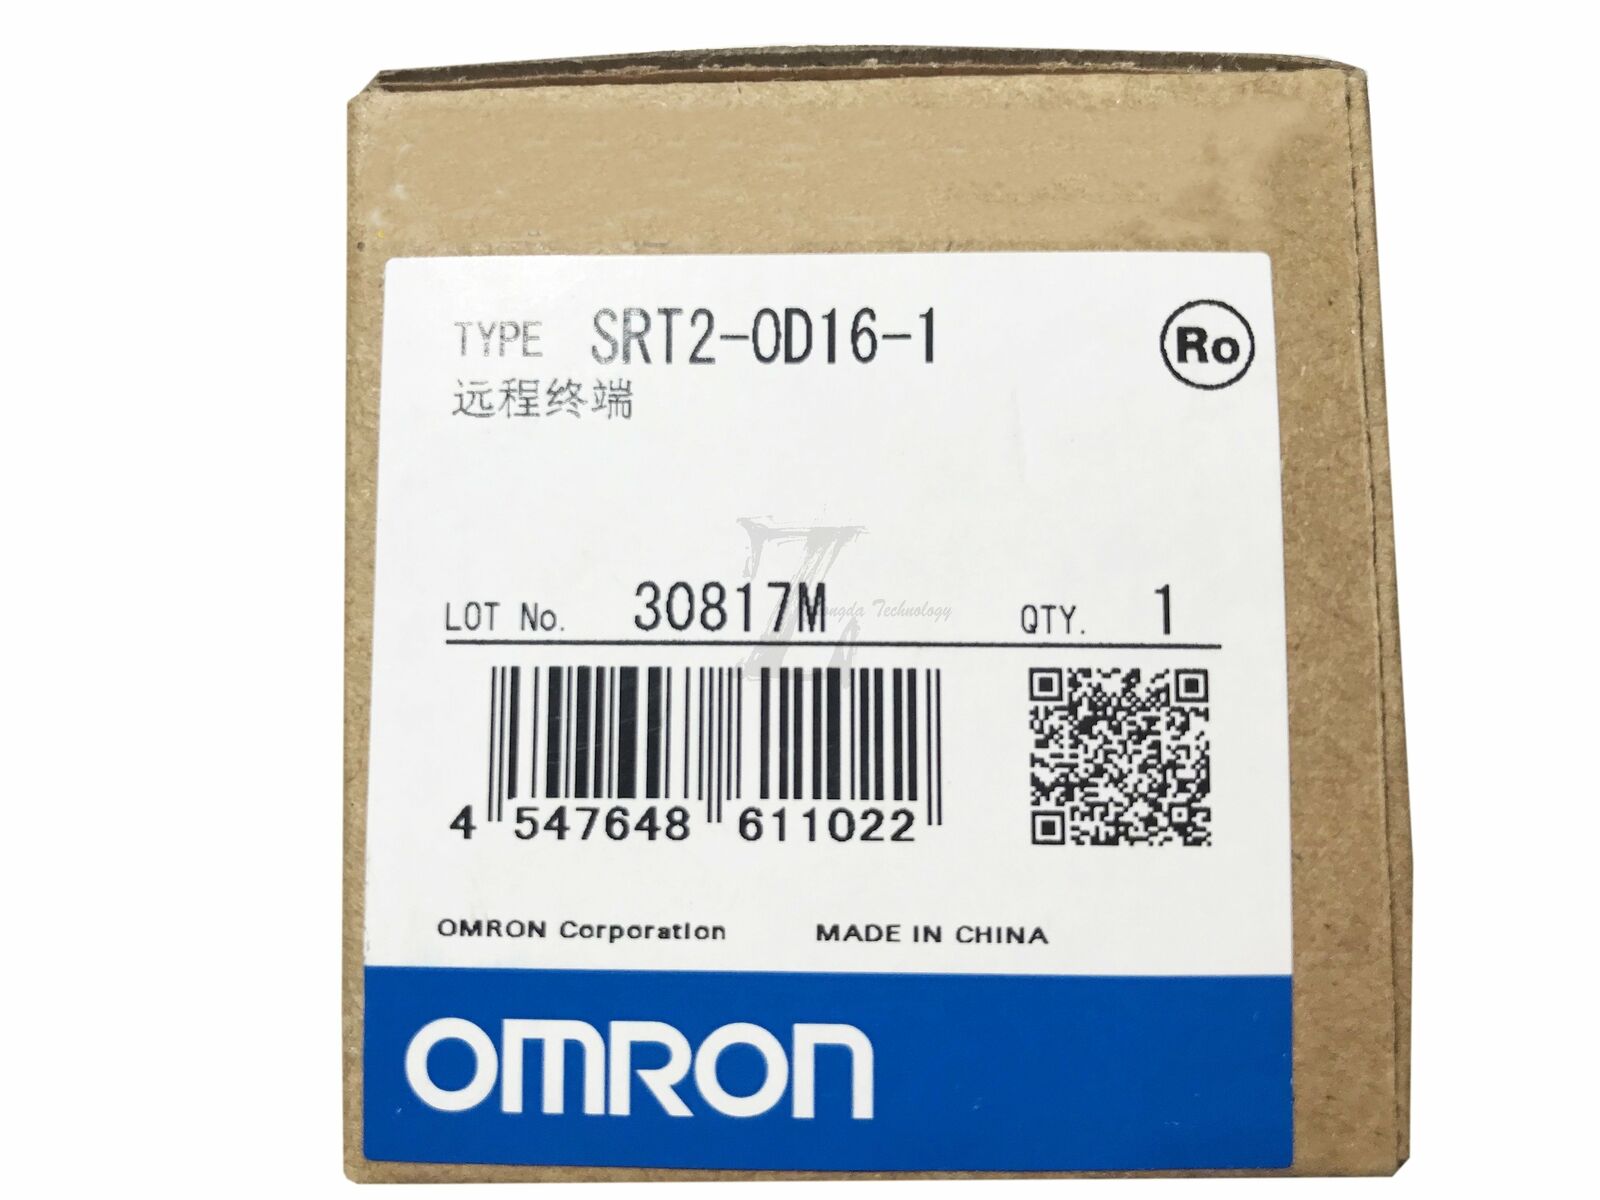 1Pc new OMRON connection module SRT2-OD16-1 one year warranty KOEED 201-500, 90%, import_2020_10_10_031751, Omron, Other